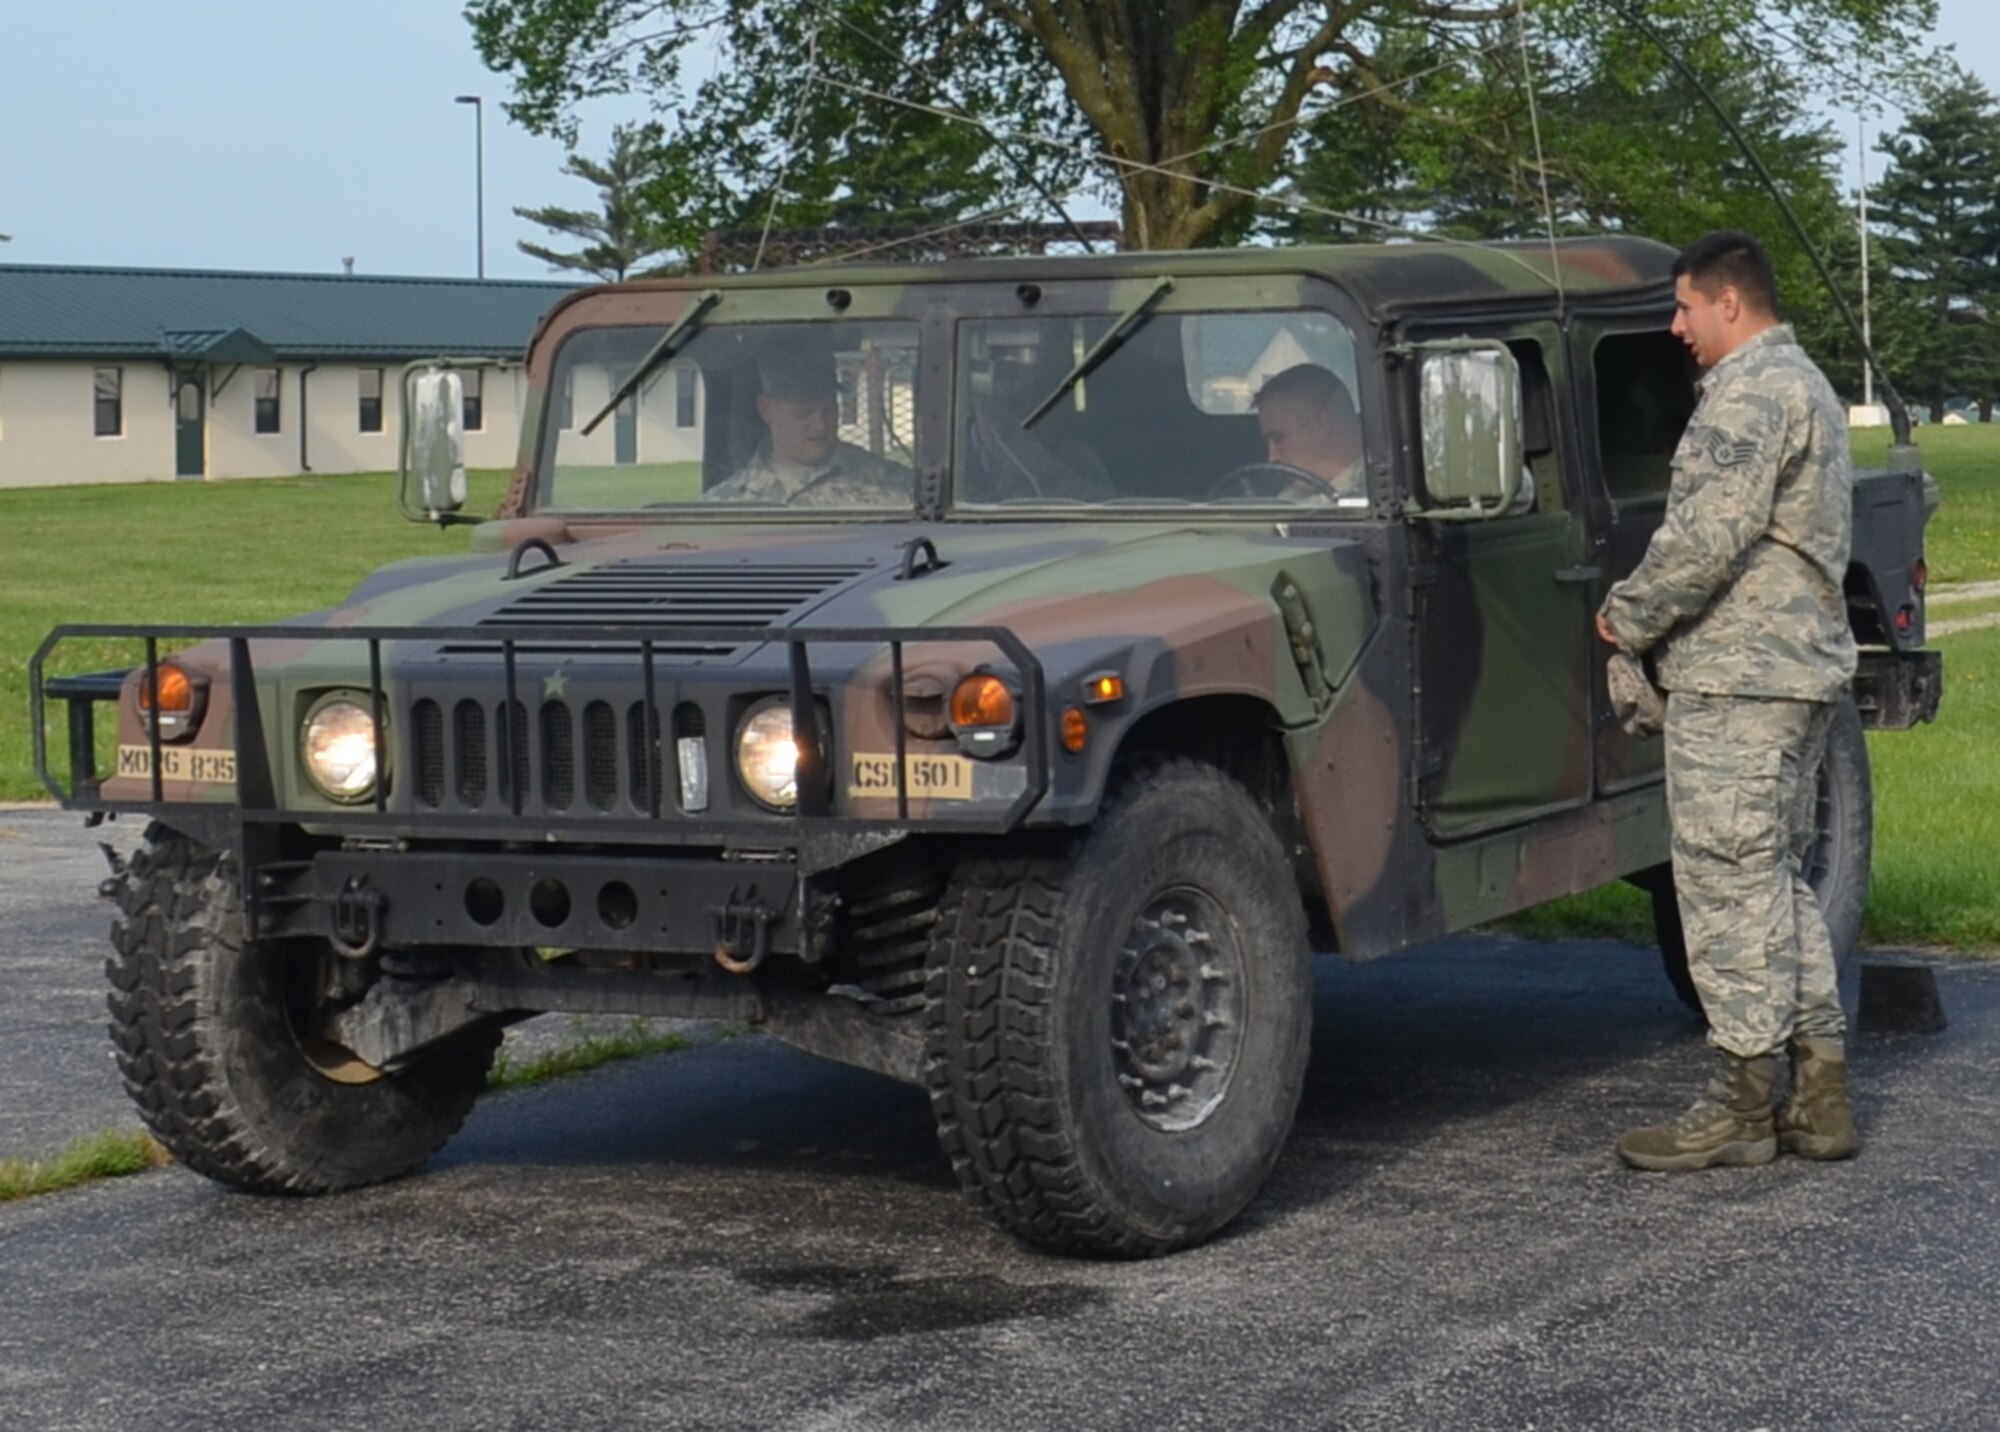 Citizen-Airmen from the 131st Bomb Wing familiarize themselves with a Humvee in preparation for convoy operations training at Camp Clark, near Nevada, Missouri, June 3, 2015.  The Airmen were training as part of a state emergency duty exercise.  (U.S. Air National Guard photo by 2nd Lt. Justin Clark)